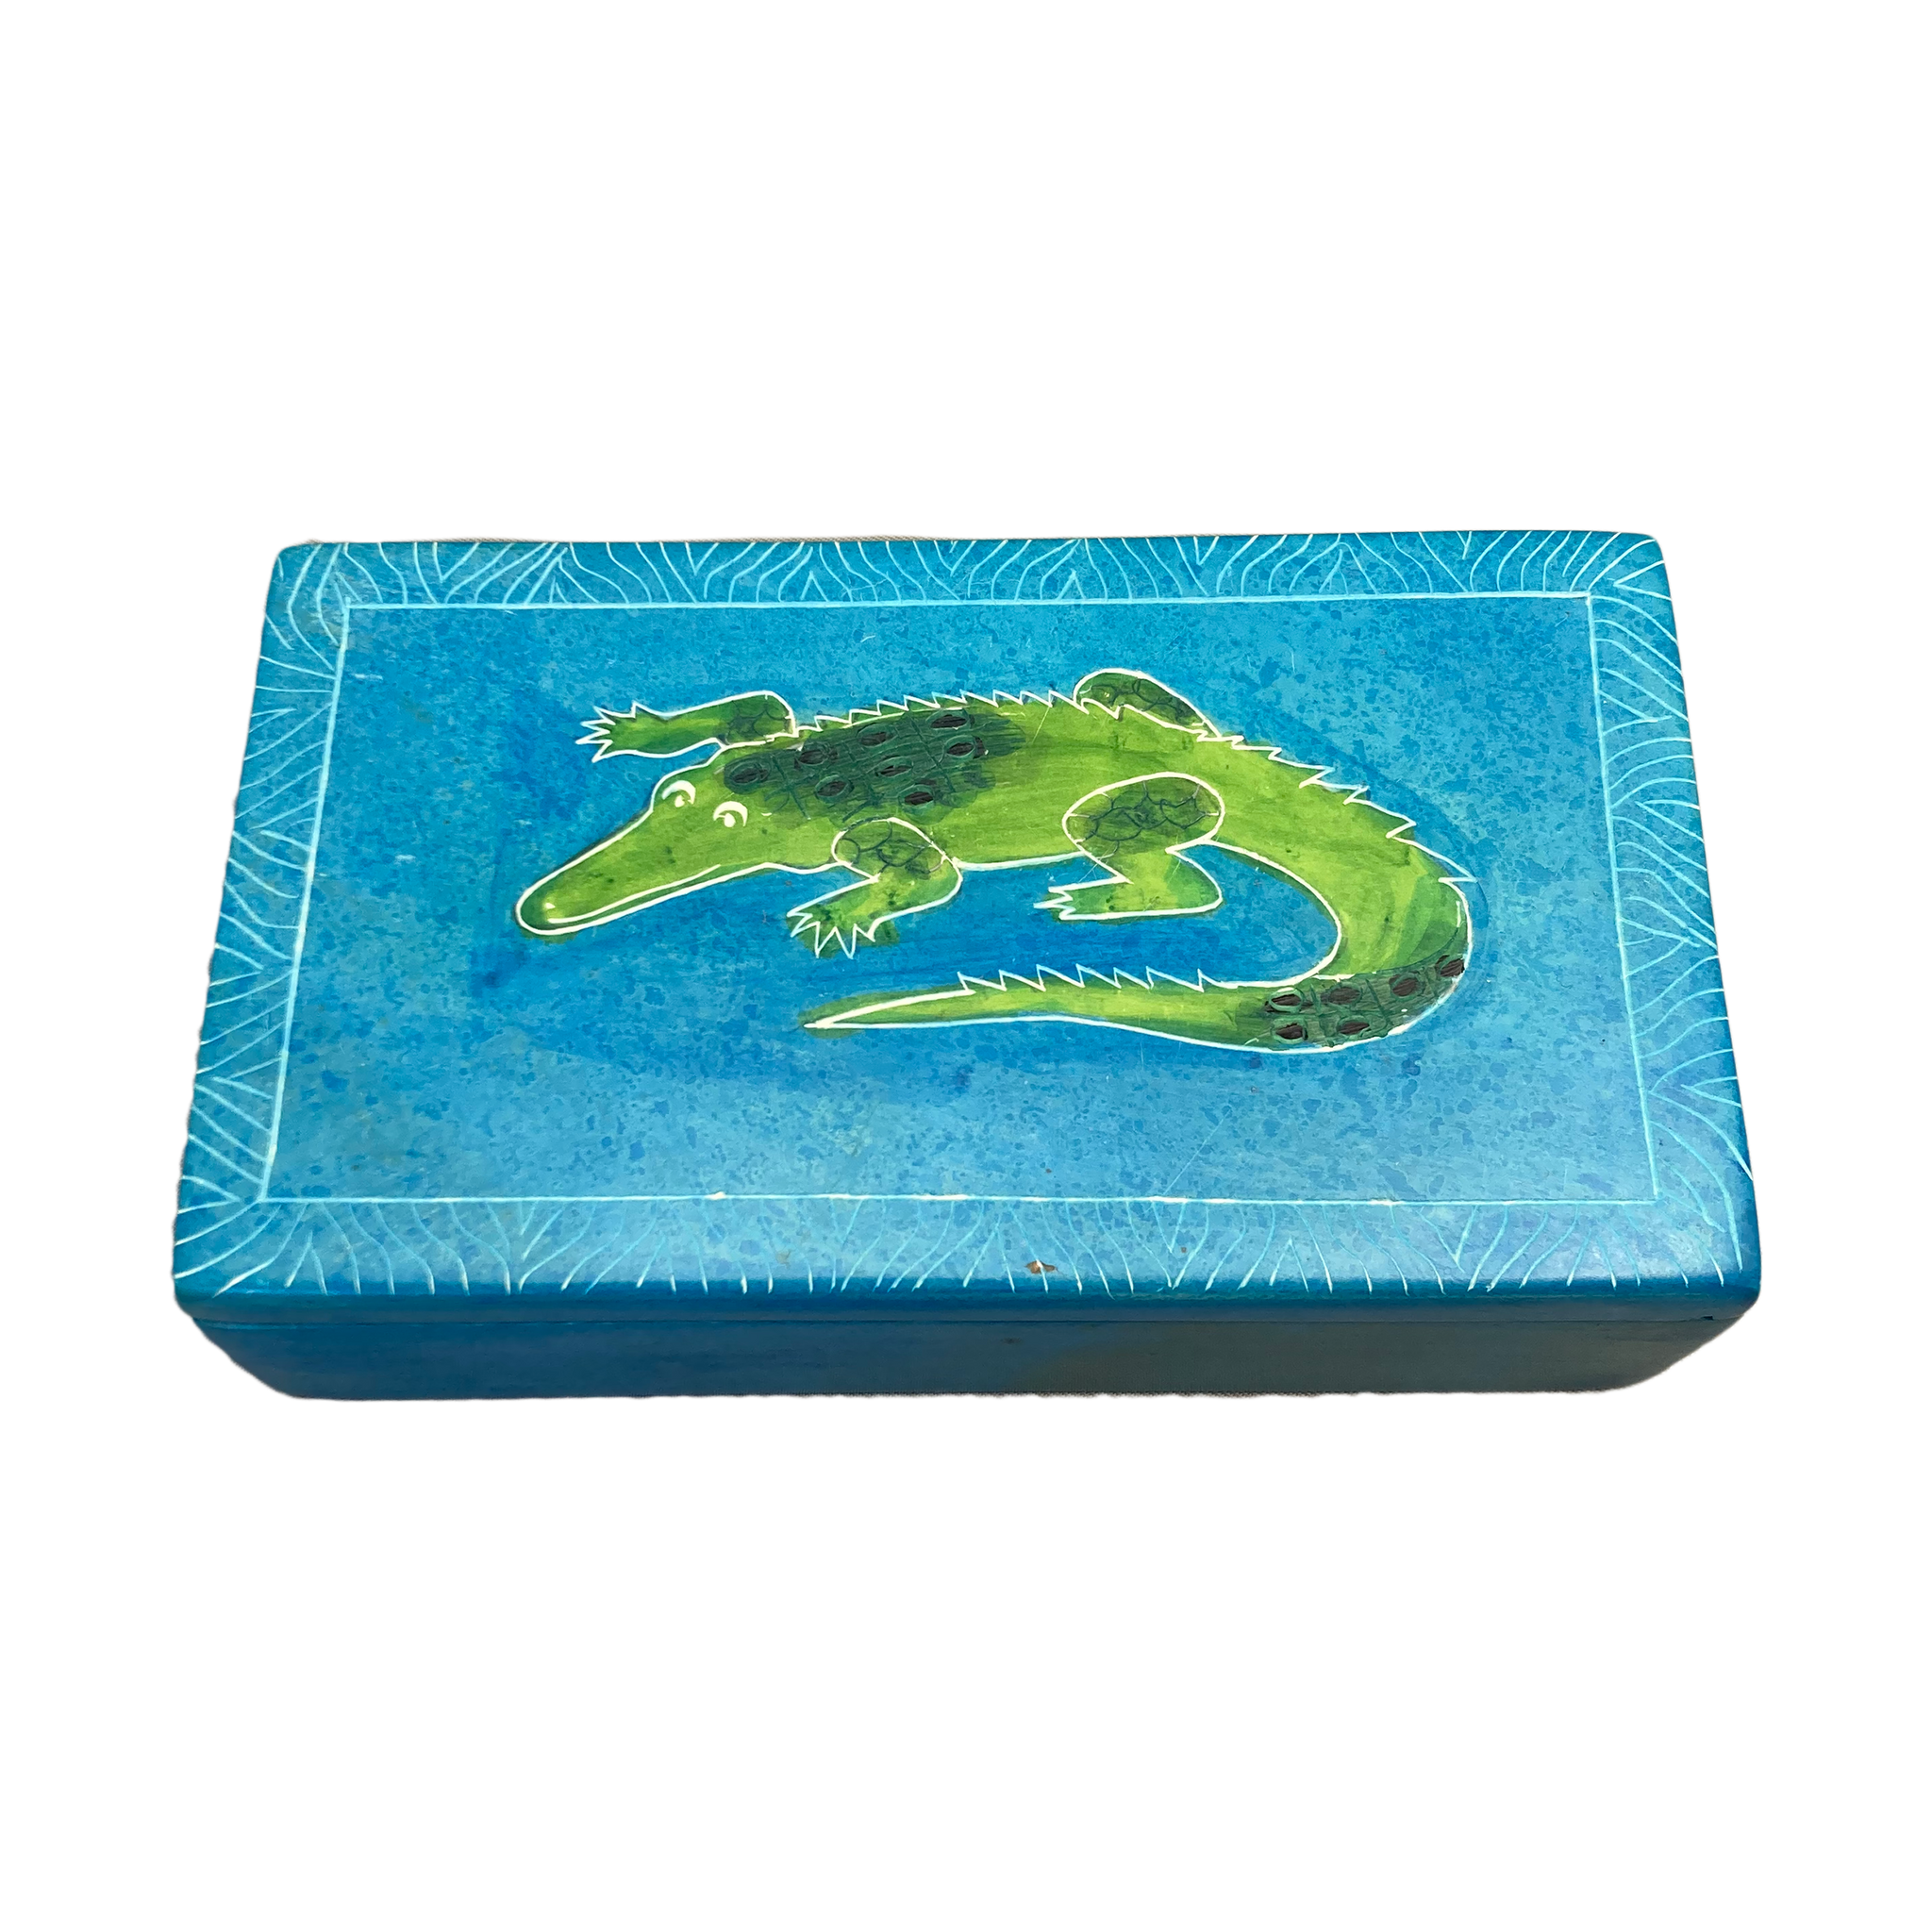 Hand-carved Soapstone Box Large (3"x5")